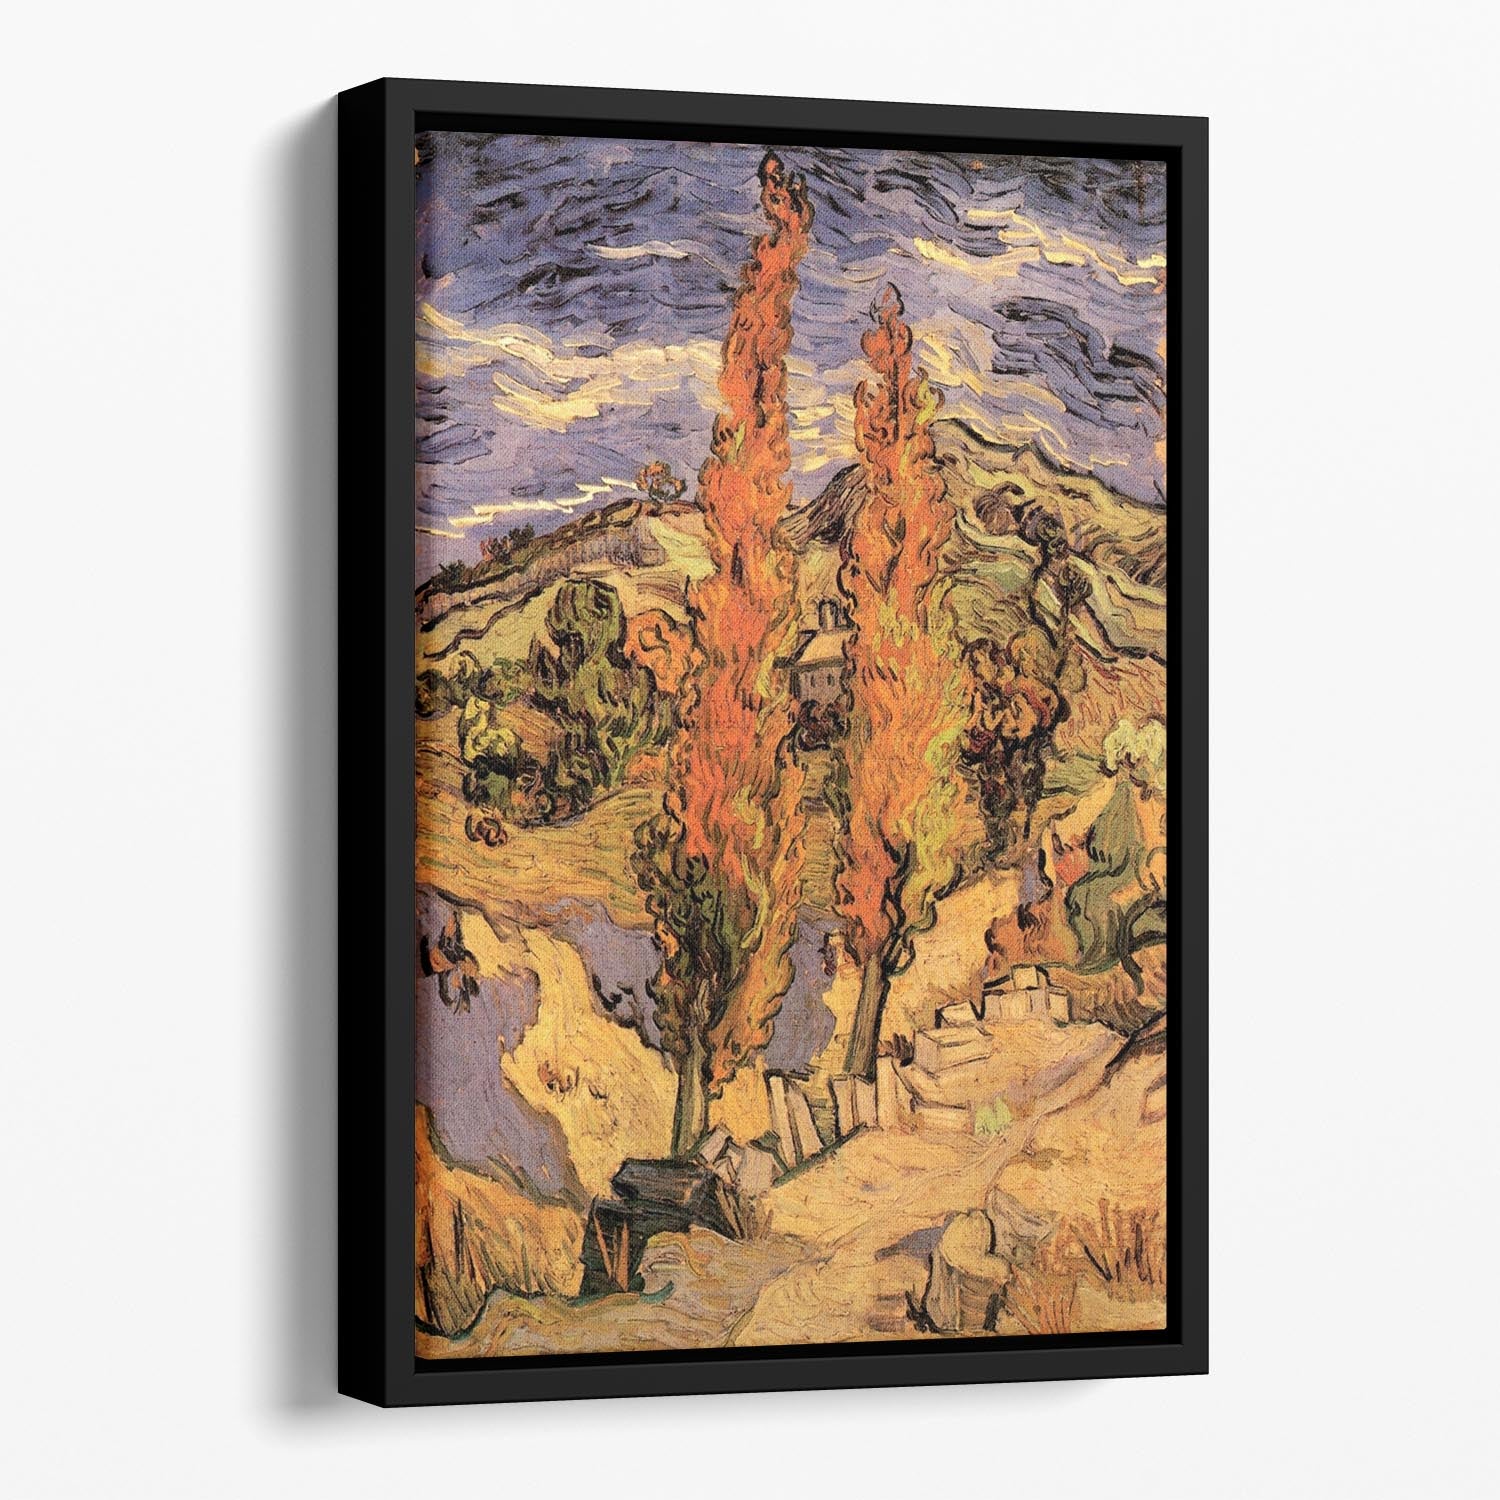 Two Poplars on a Road Through the Hills by Van Gogh Floating Framed Canvas